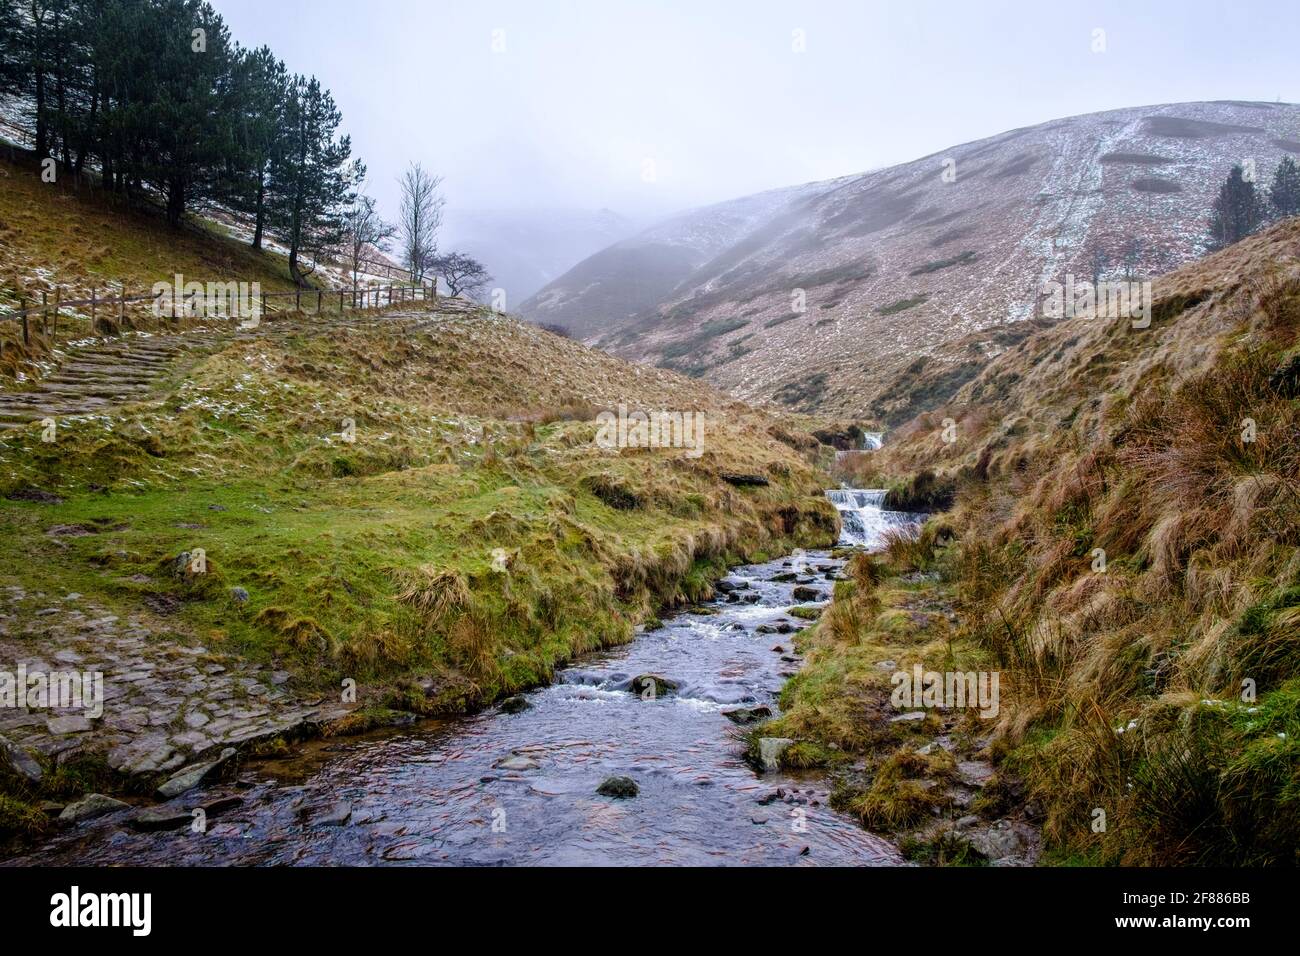 The River Noe and the start of Jacob's Ladder at the foot of Kinder Scout on a typically wet cold day in winter, Vale of Edale, Derbyshire, England UK Stock Photo